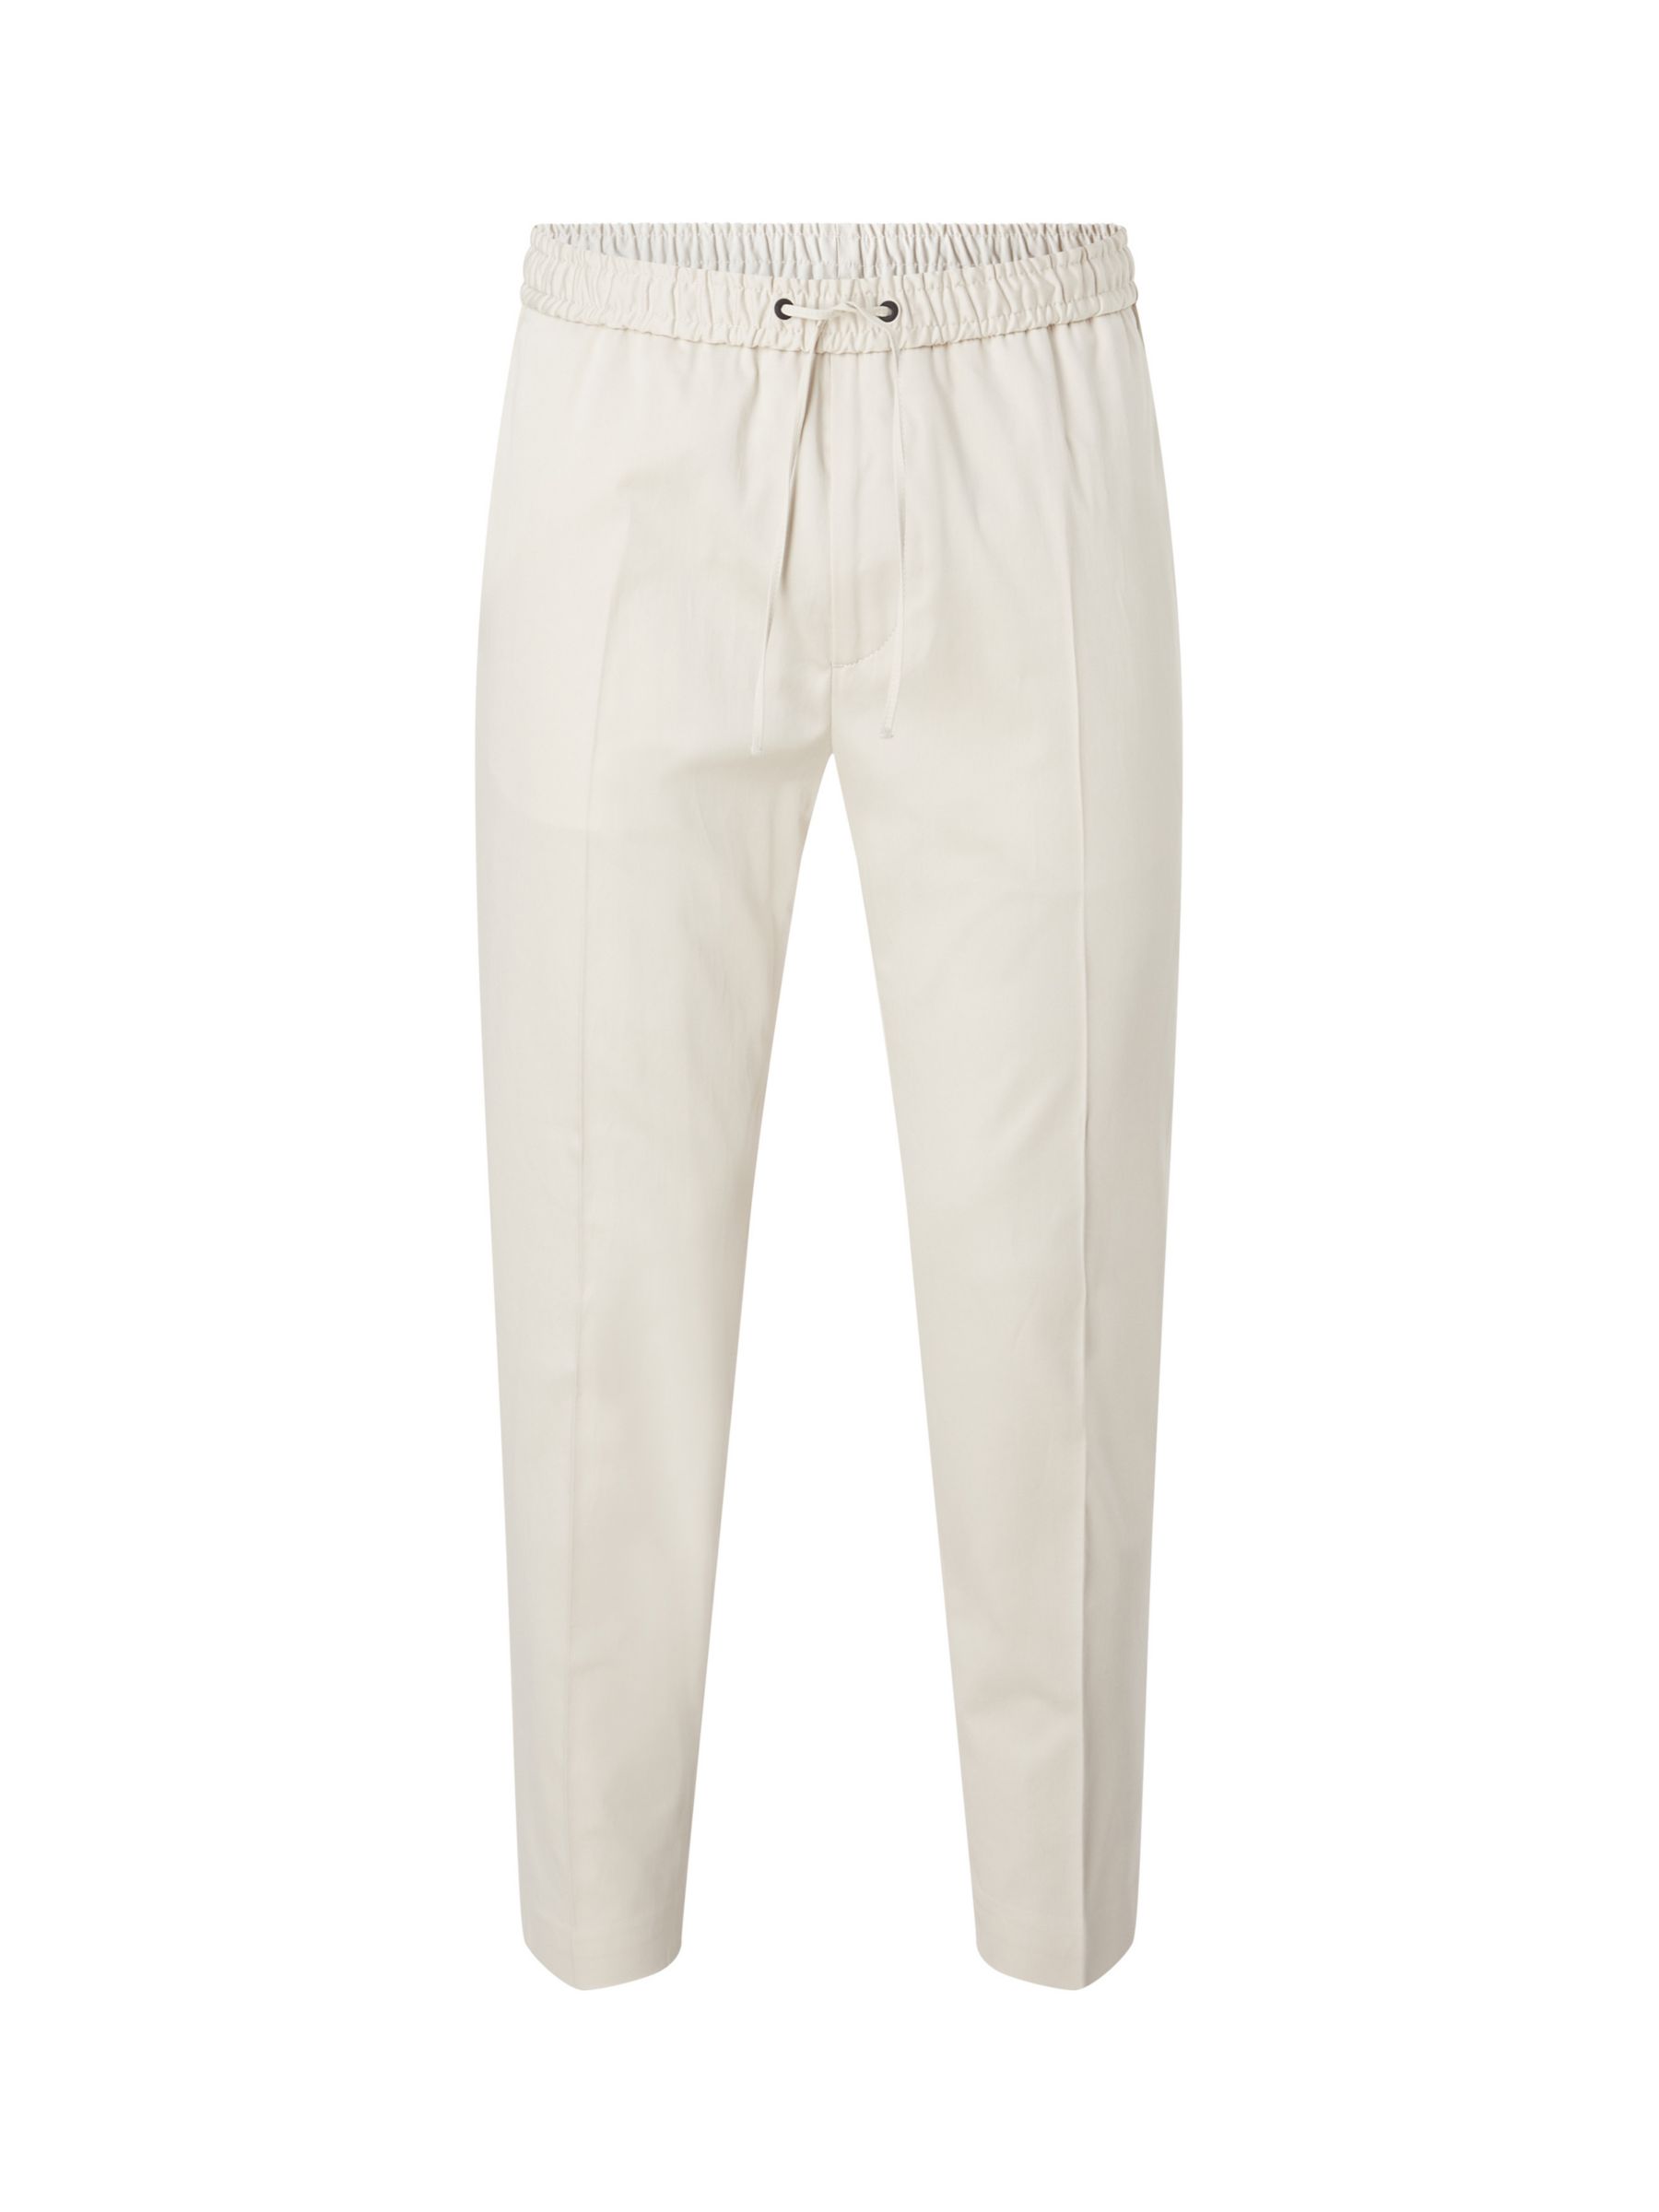 Calvin Klein Stretch Sateen Jogger Trousers, Stony Beige at John Lewis ...